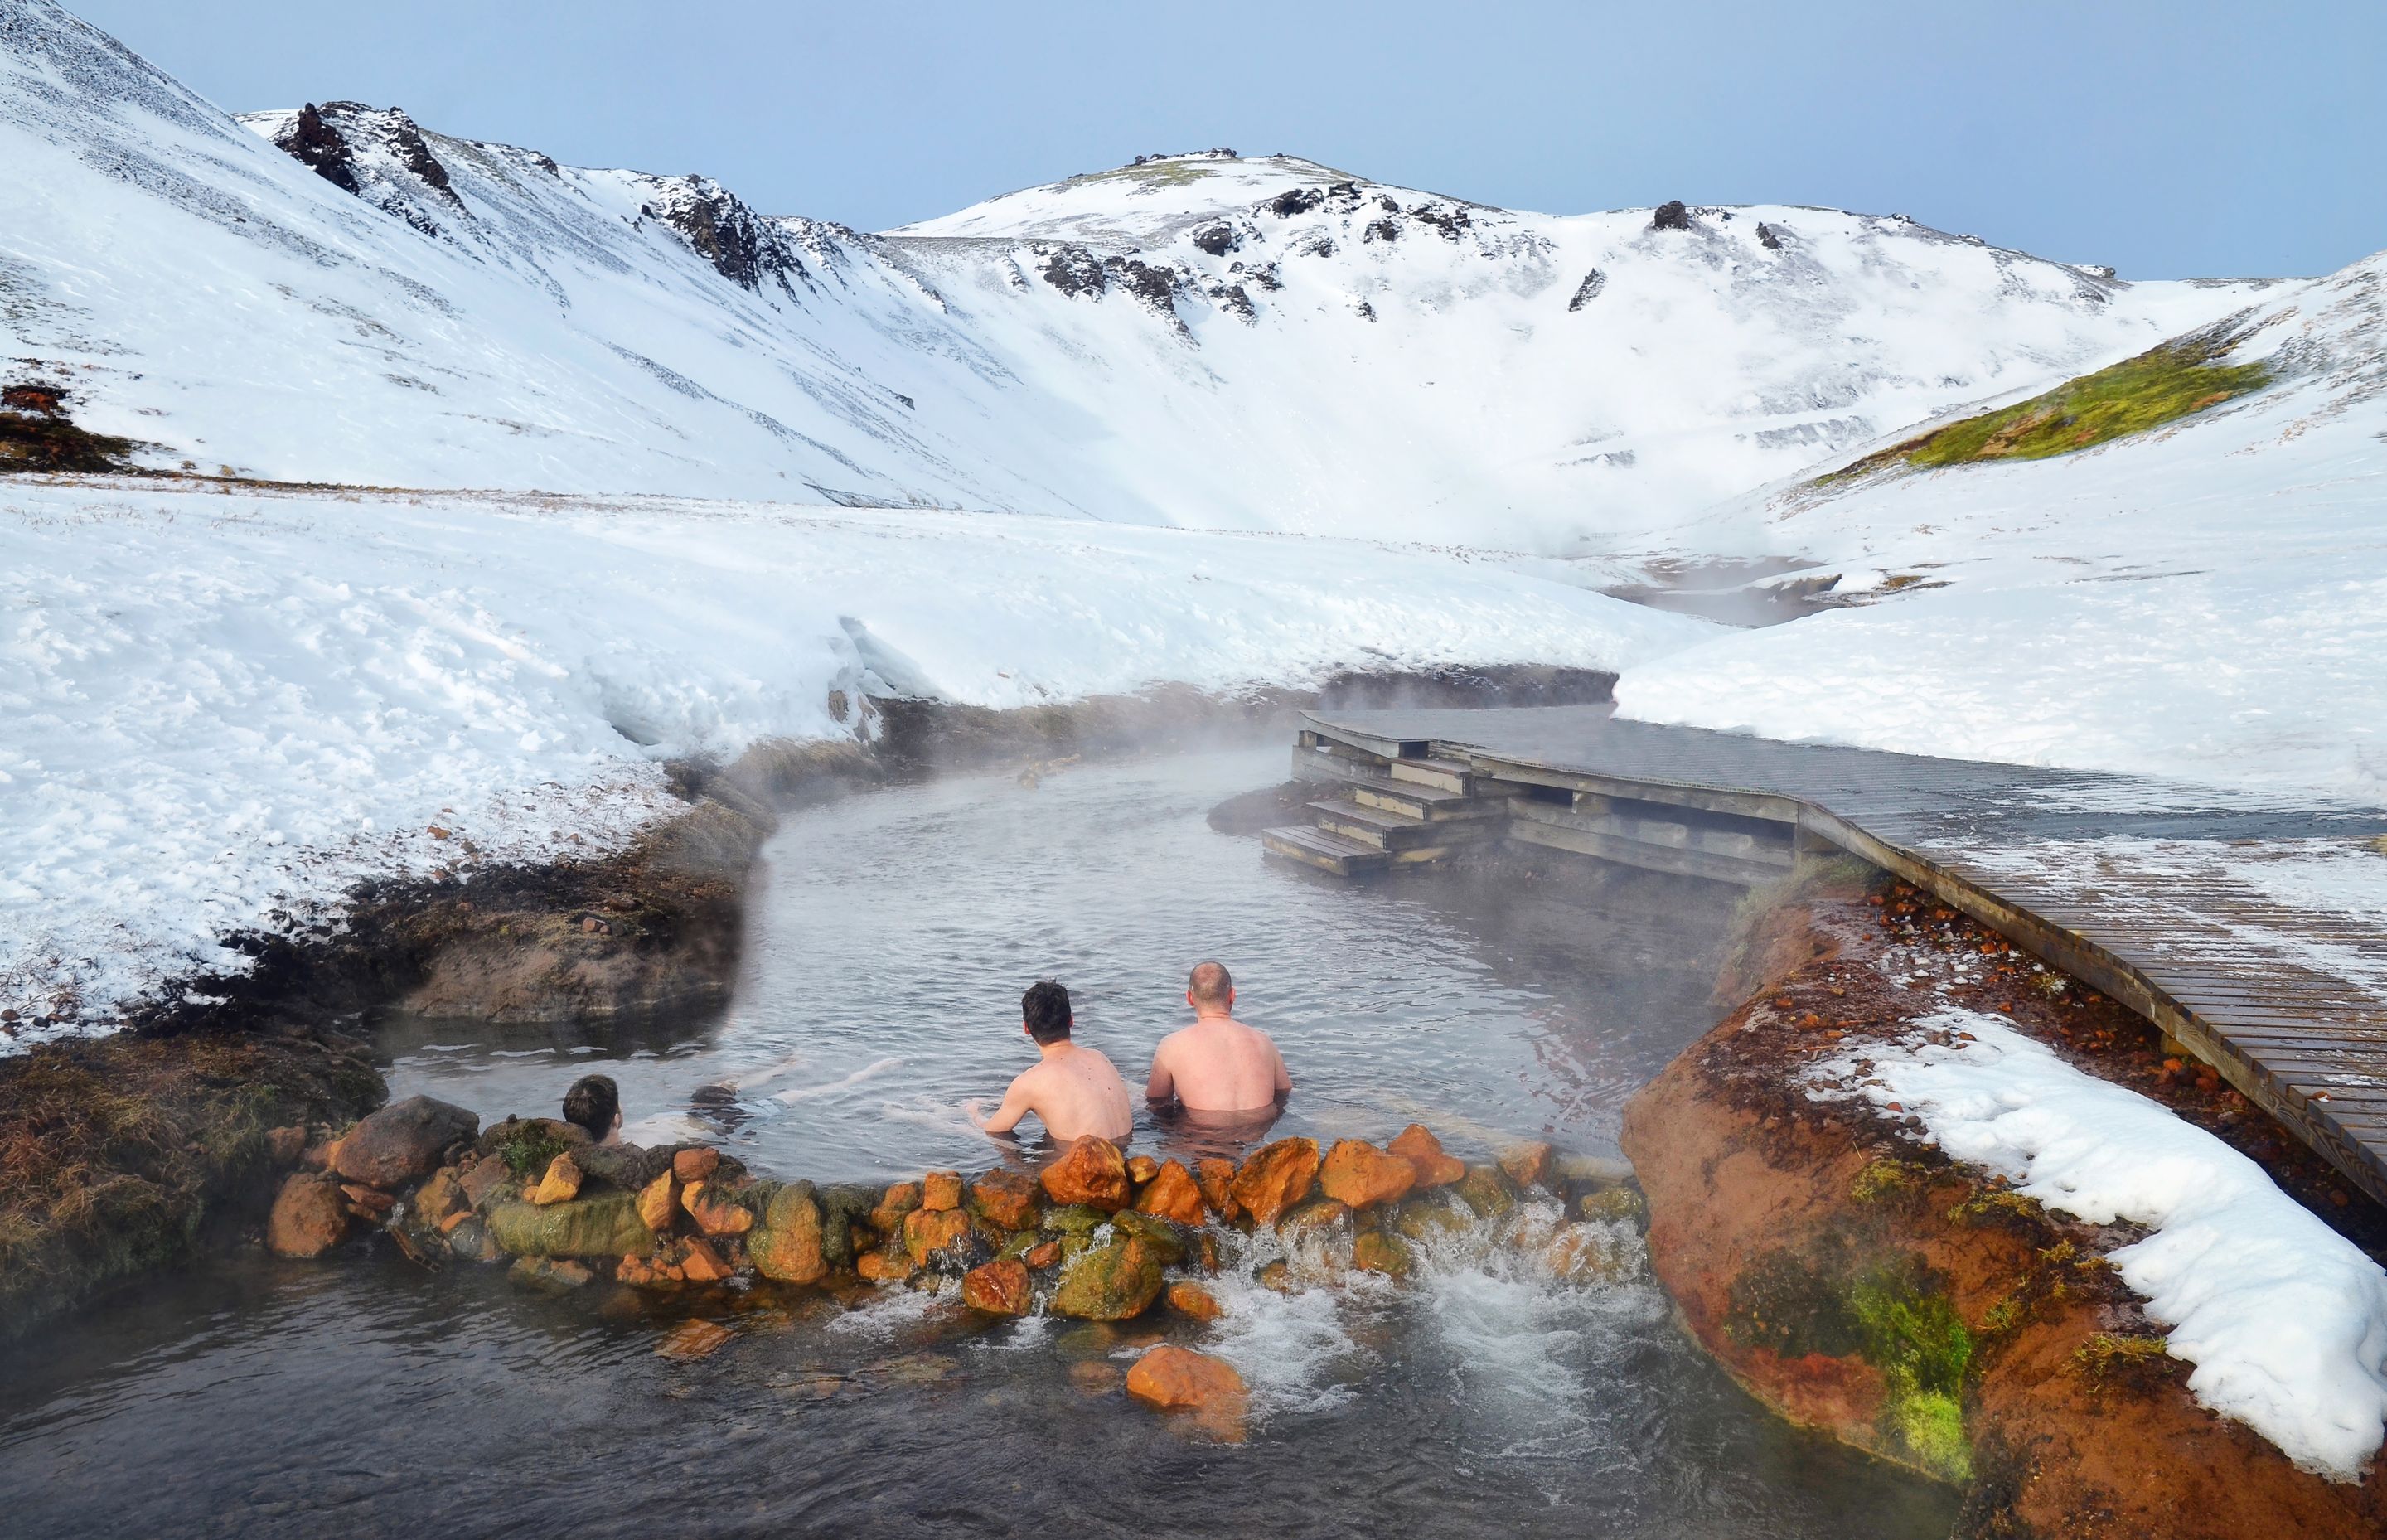 People sitting in Hot river in Iceland in winter snowy mountains